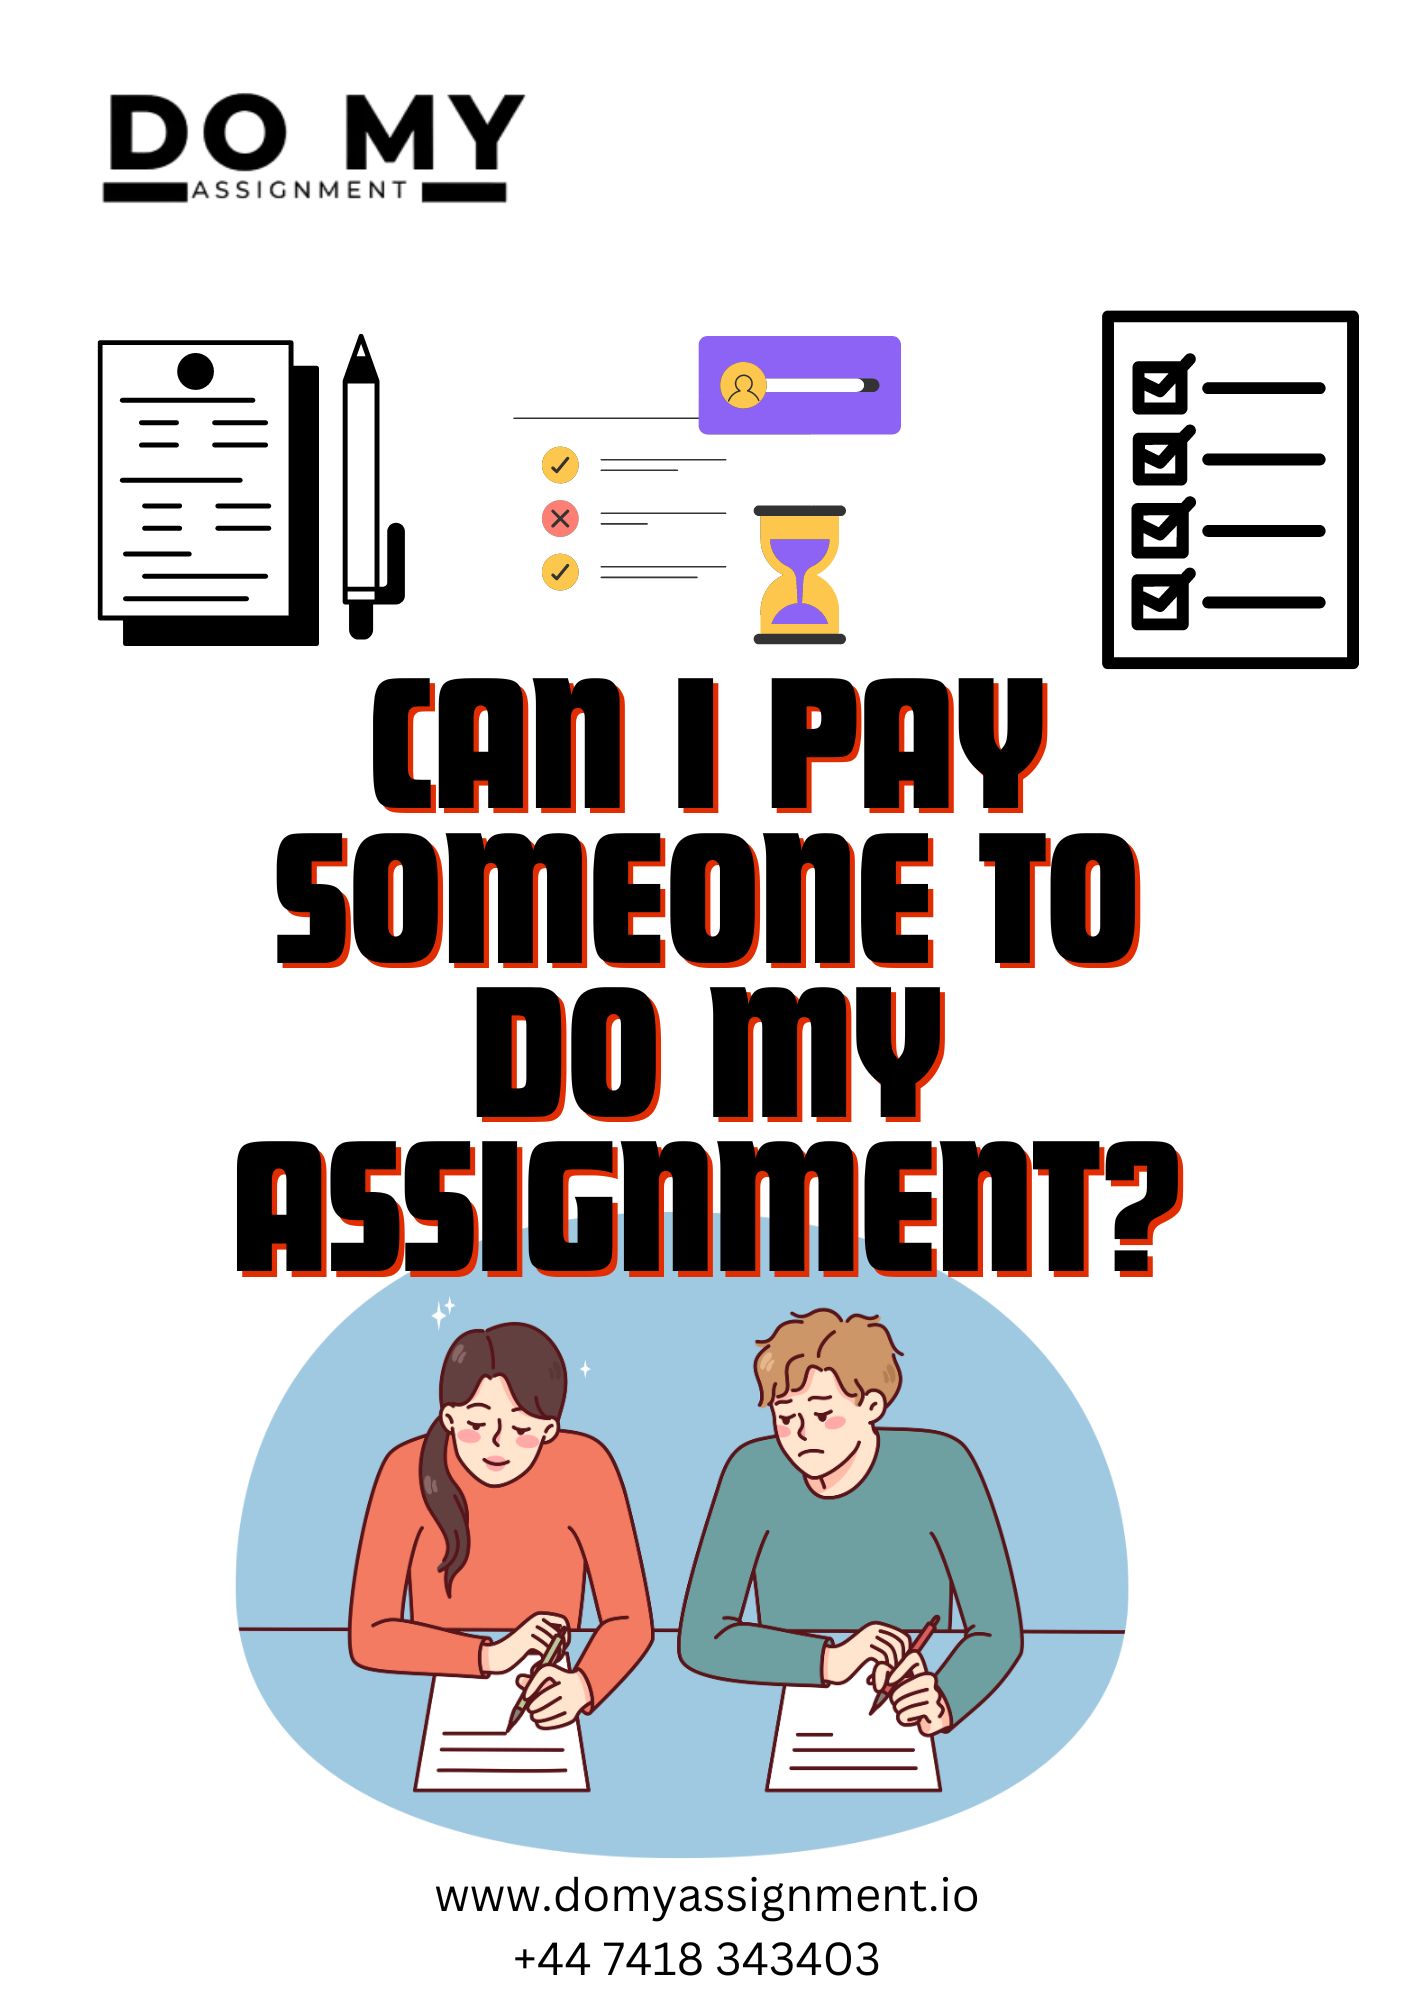 Do My Assignment: A Podcast to Mastering Assignments